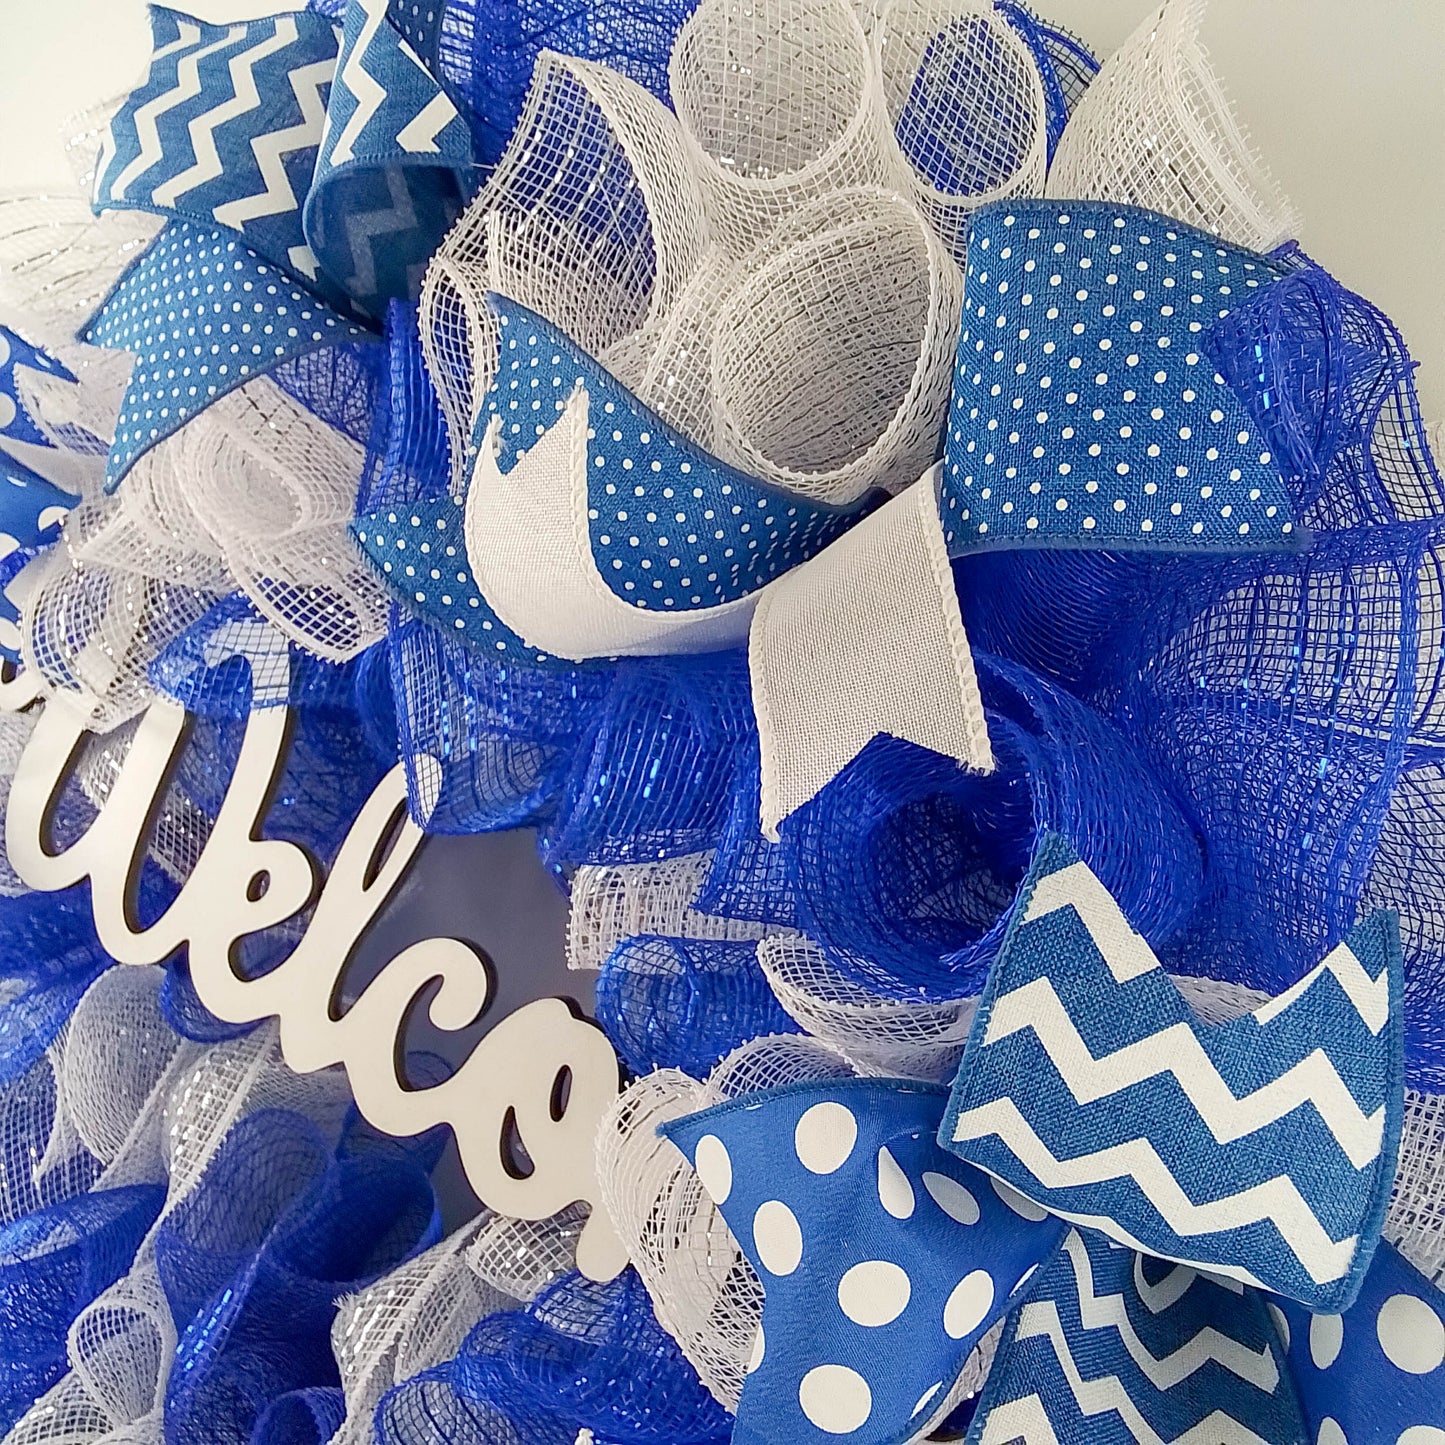 Royal Blue Welcome Wreath - Everyday Mother's Day Gift